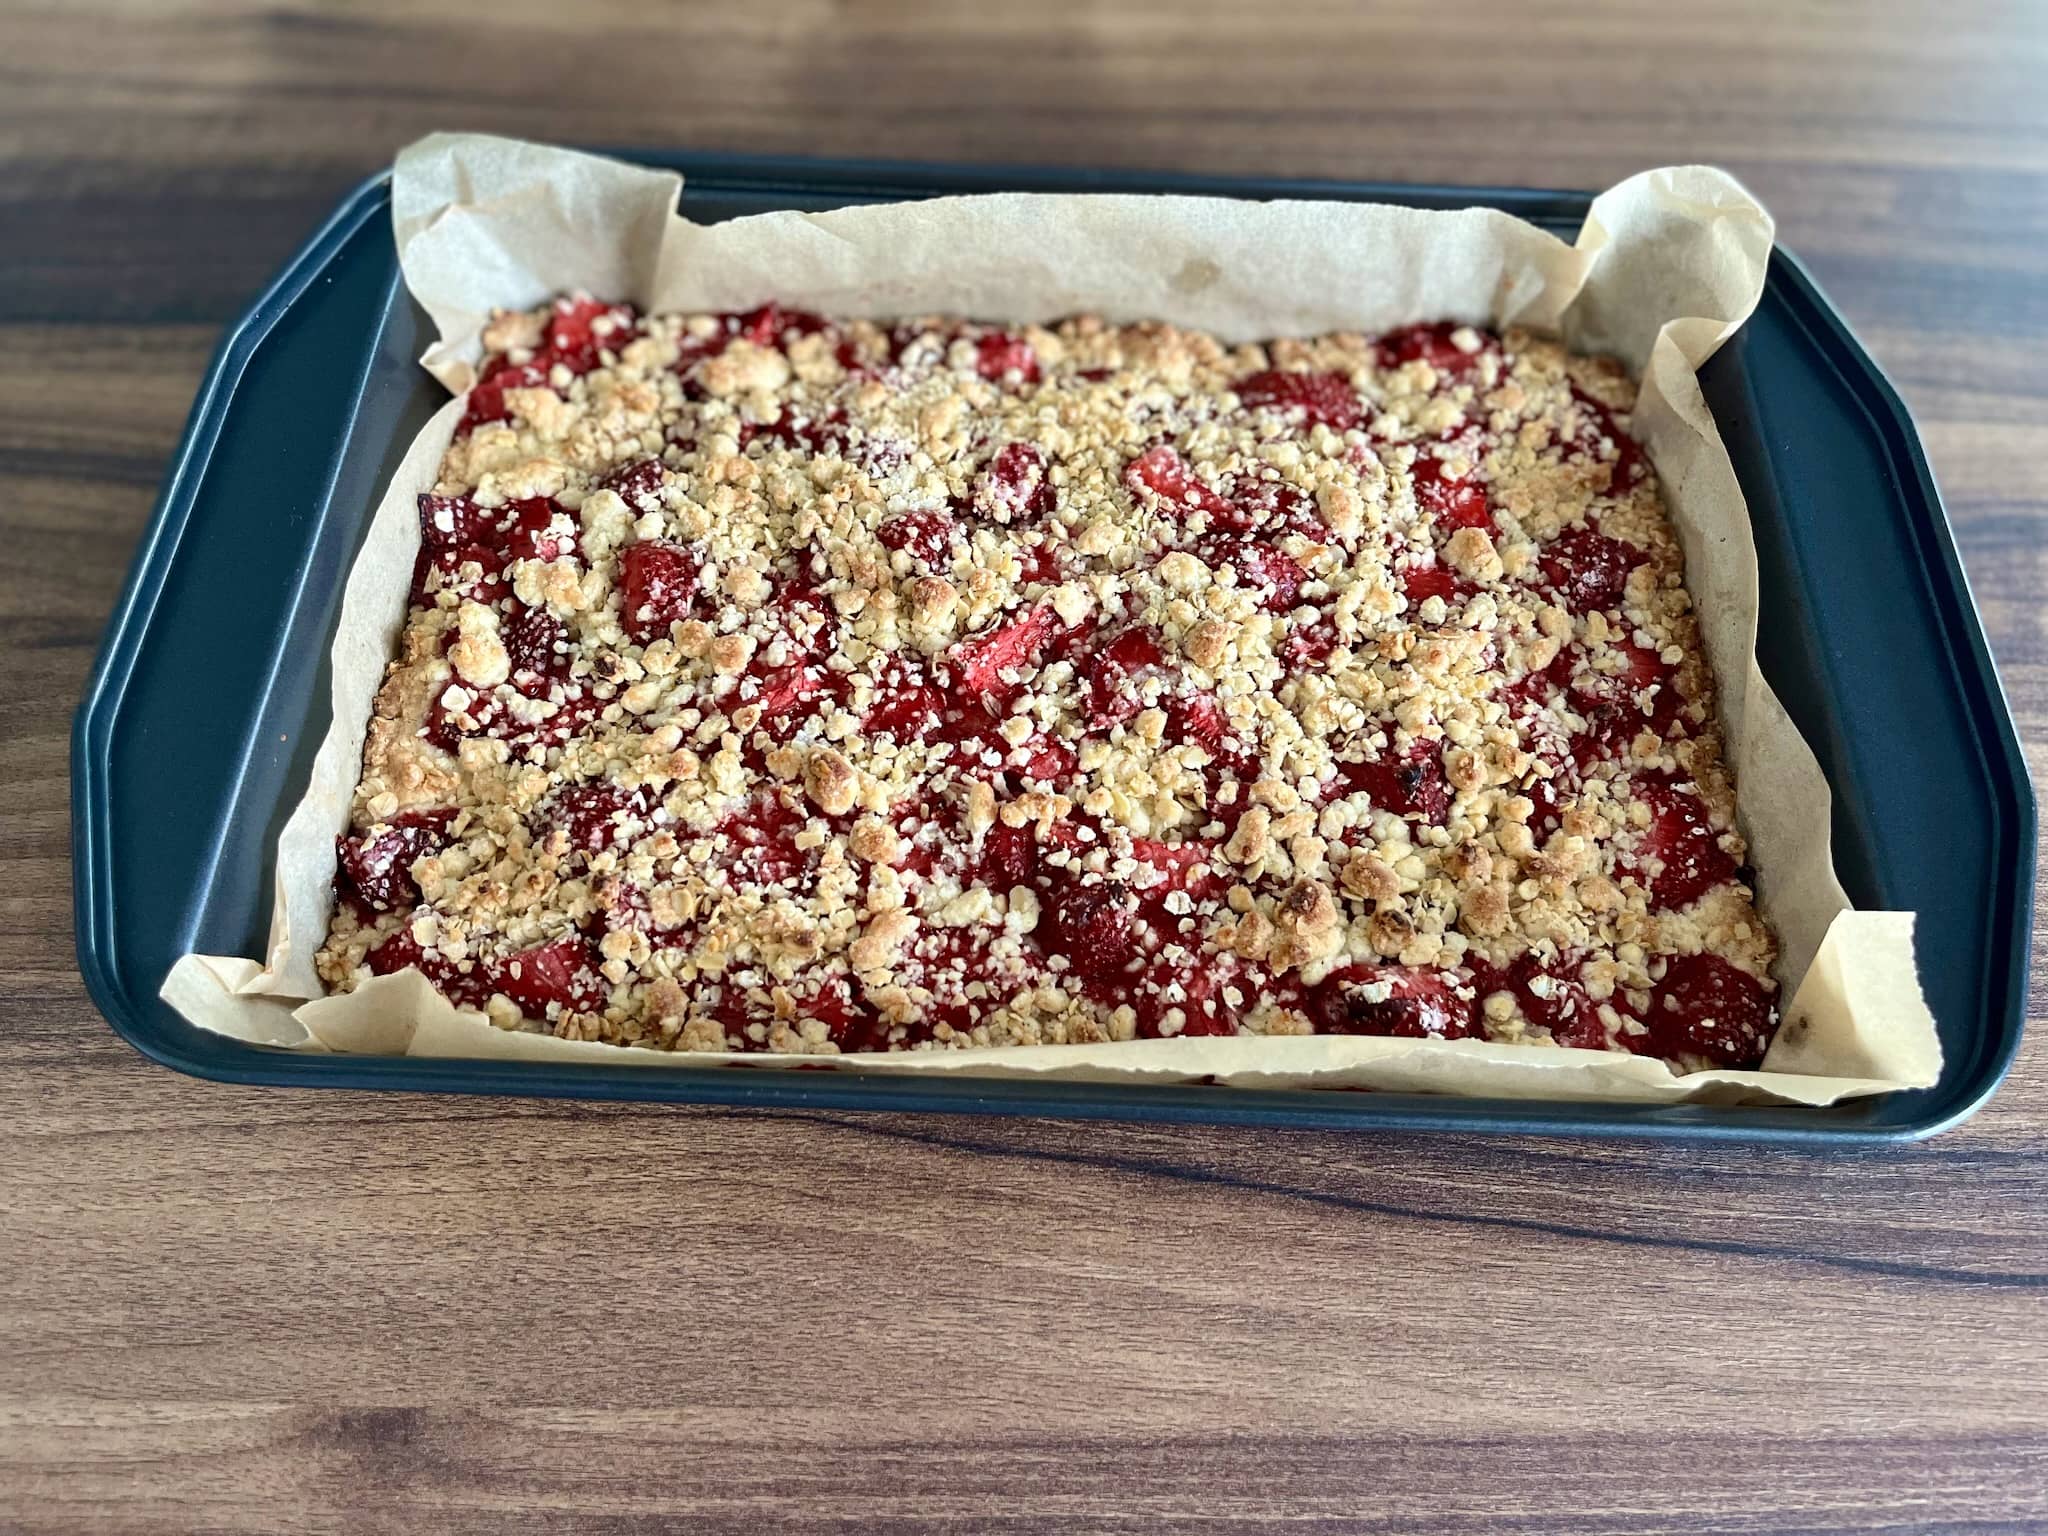 Nicely baked Simple Strawberry-Oat Crumble Bars